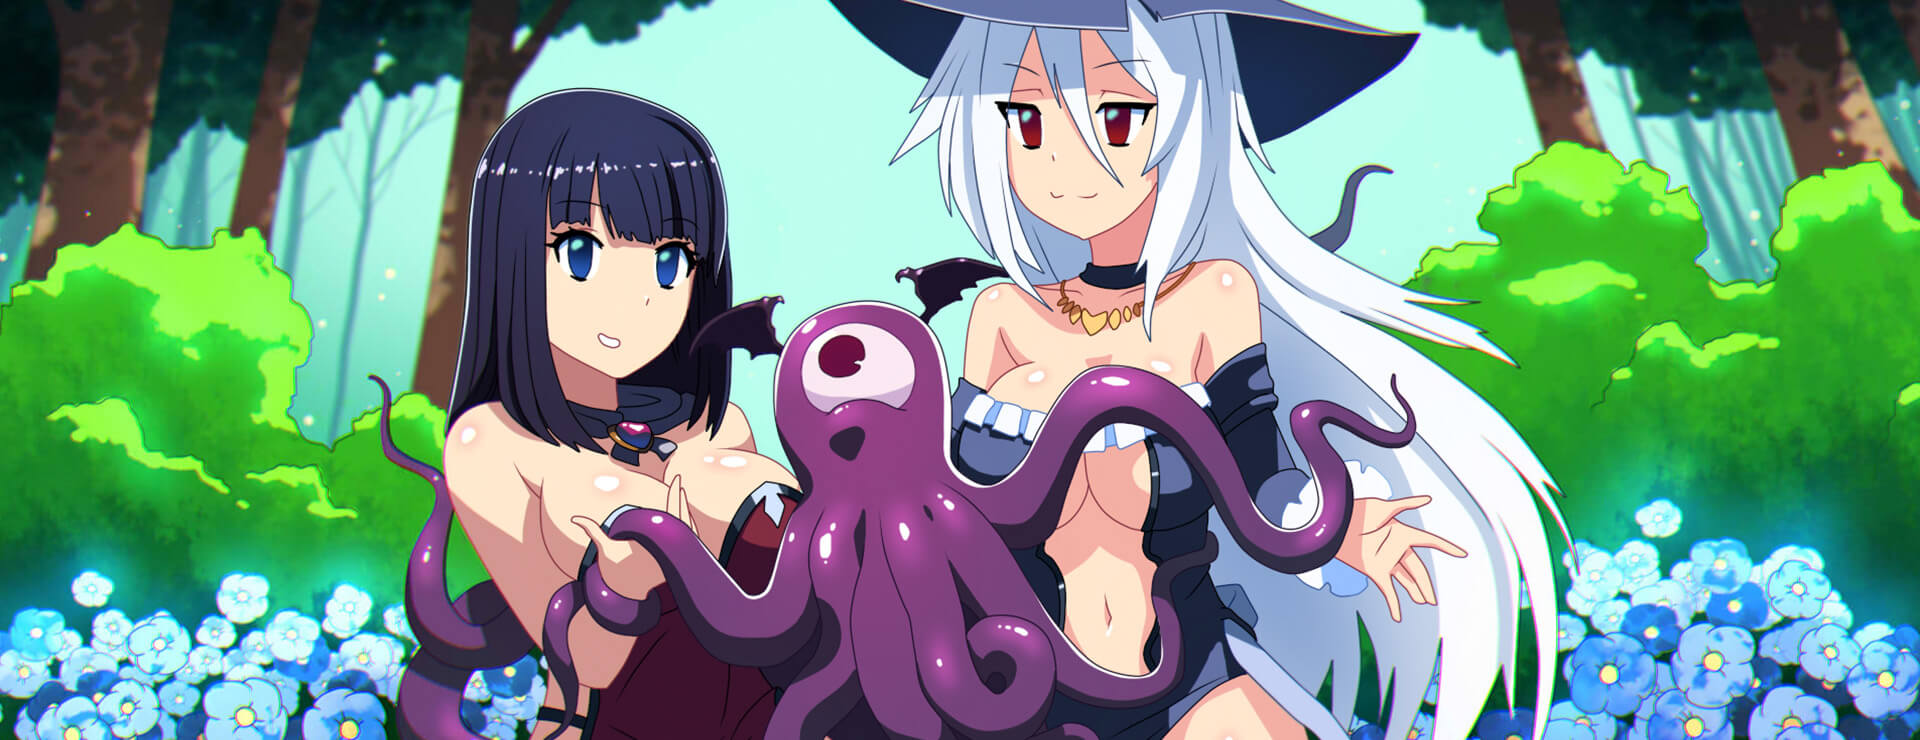 Love Witches - Visual Novel Game